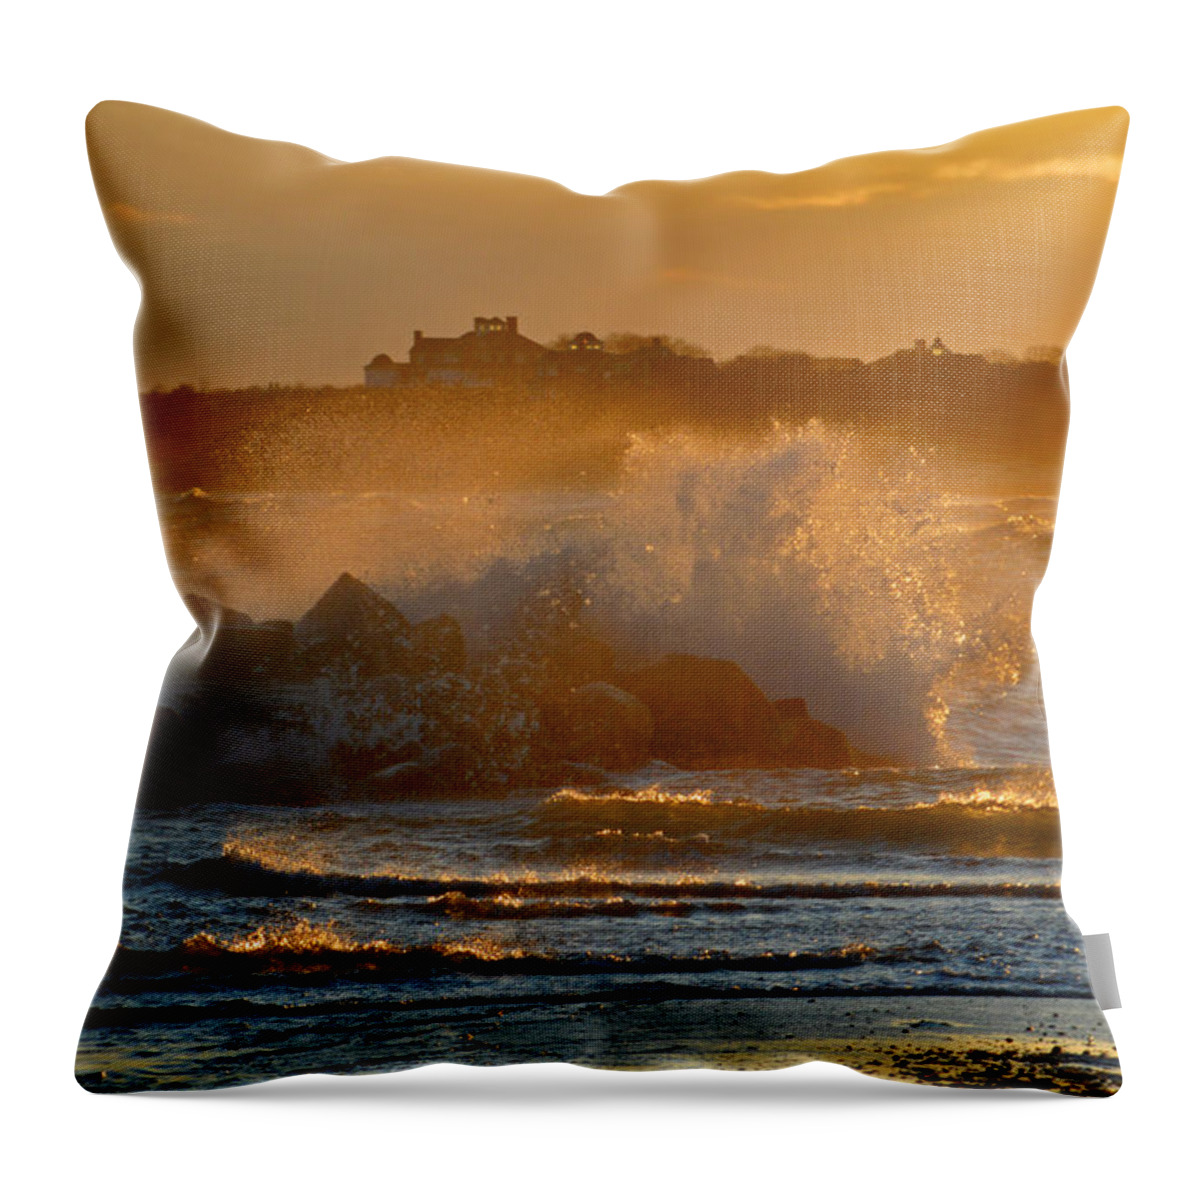 Cape Cod Throw Pillow featuring the photograph Cape Cod Bay - Heavy Surf - Sunrise by Dianne Cowen Cape Cod Photography